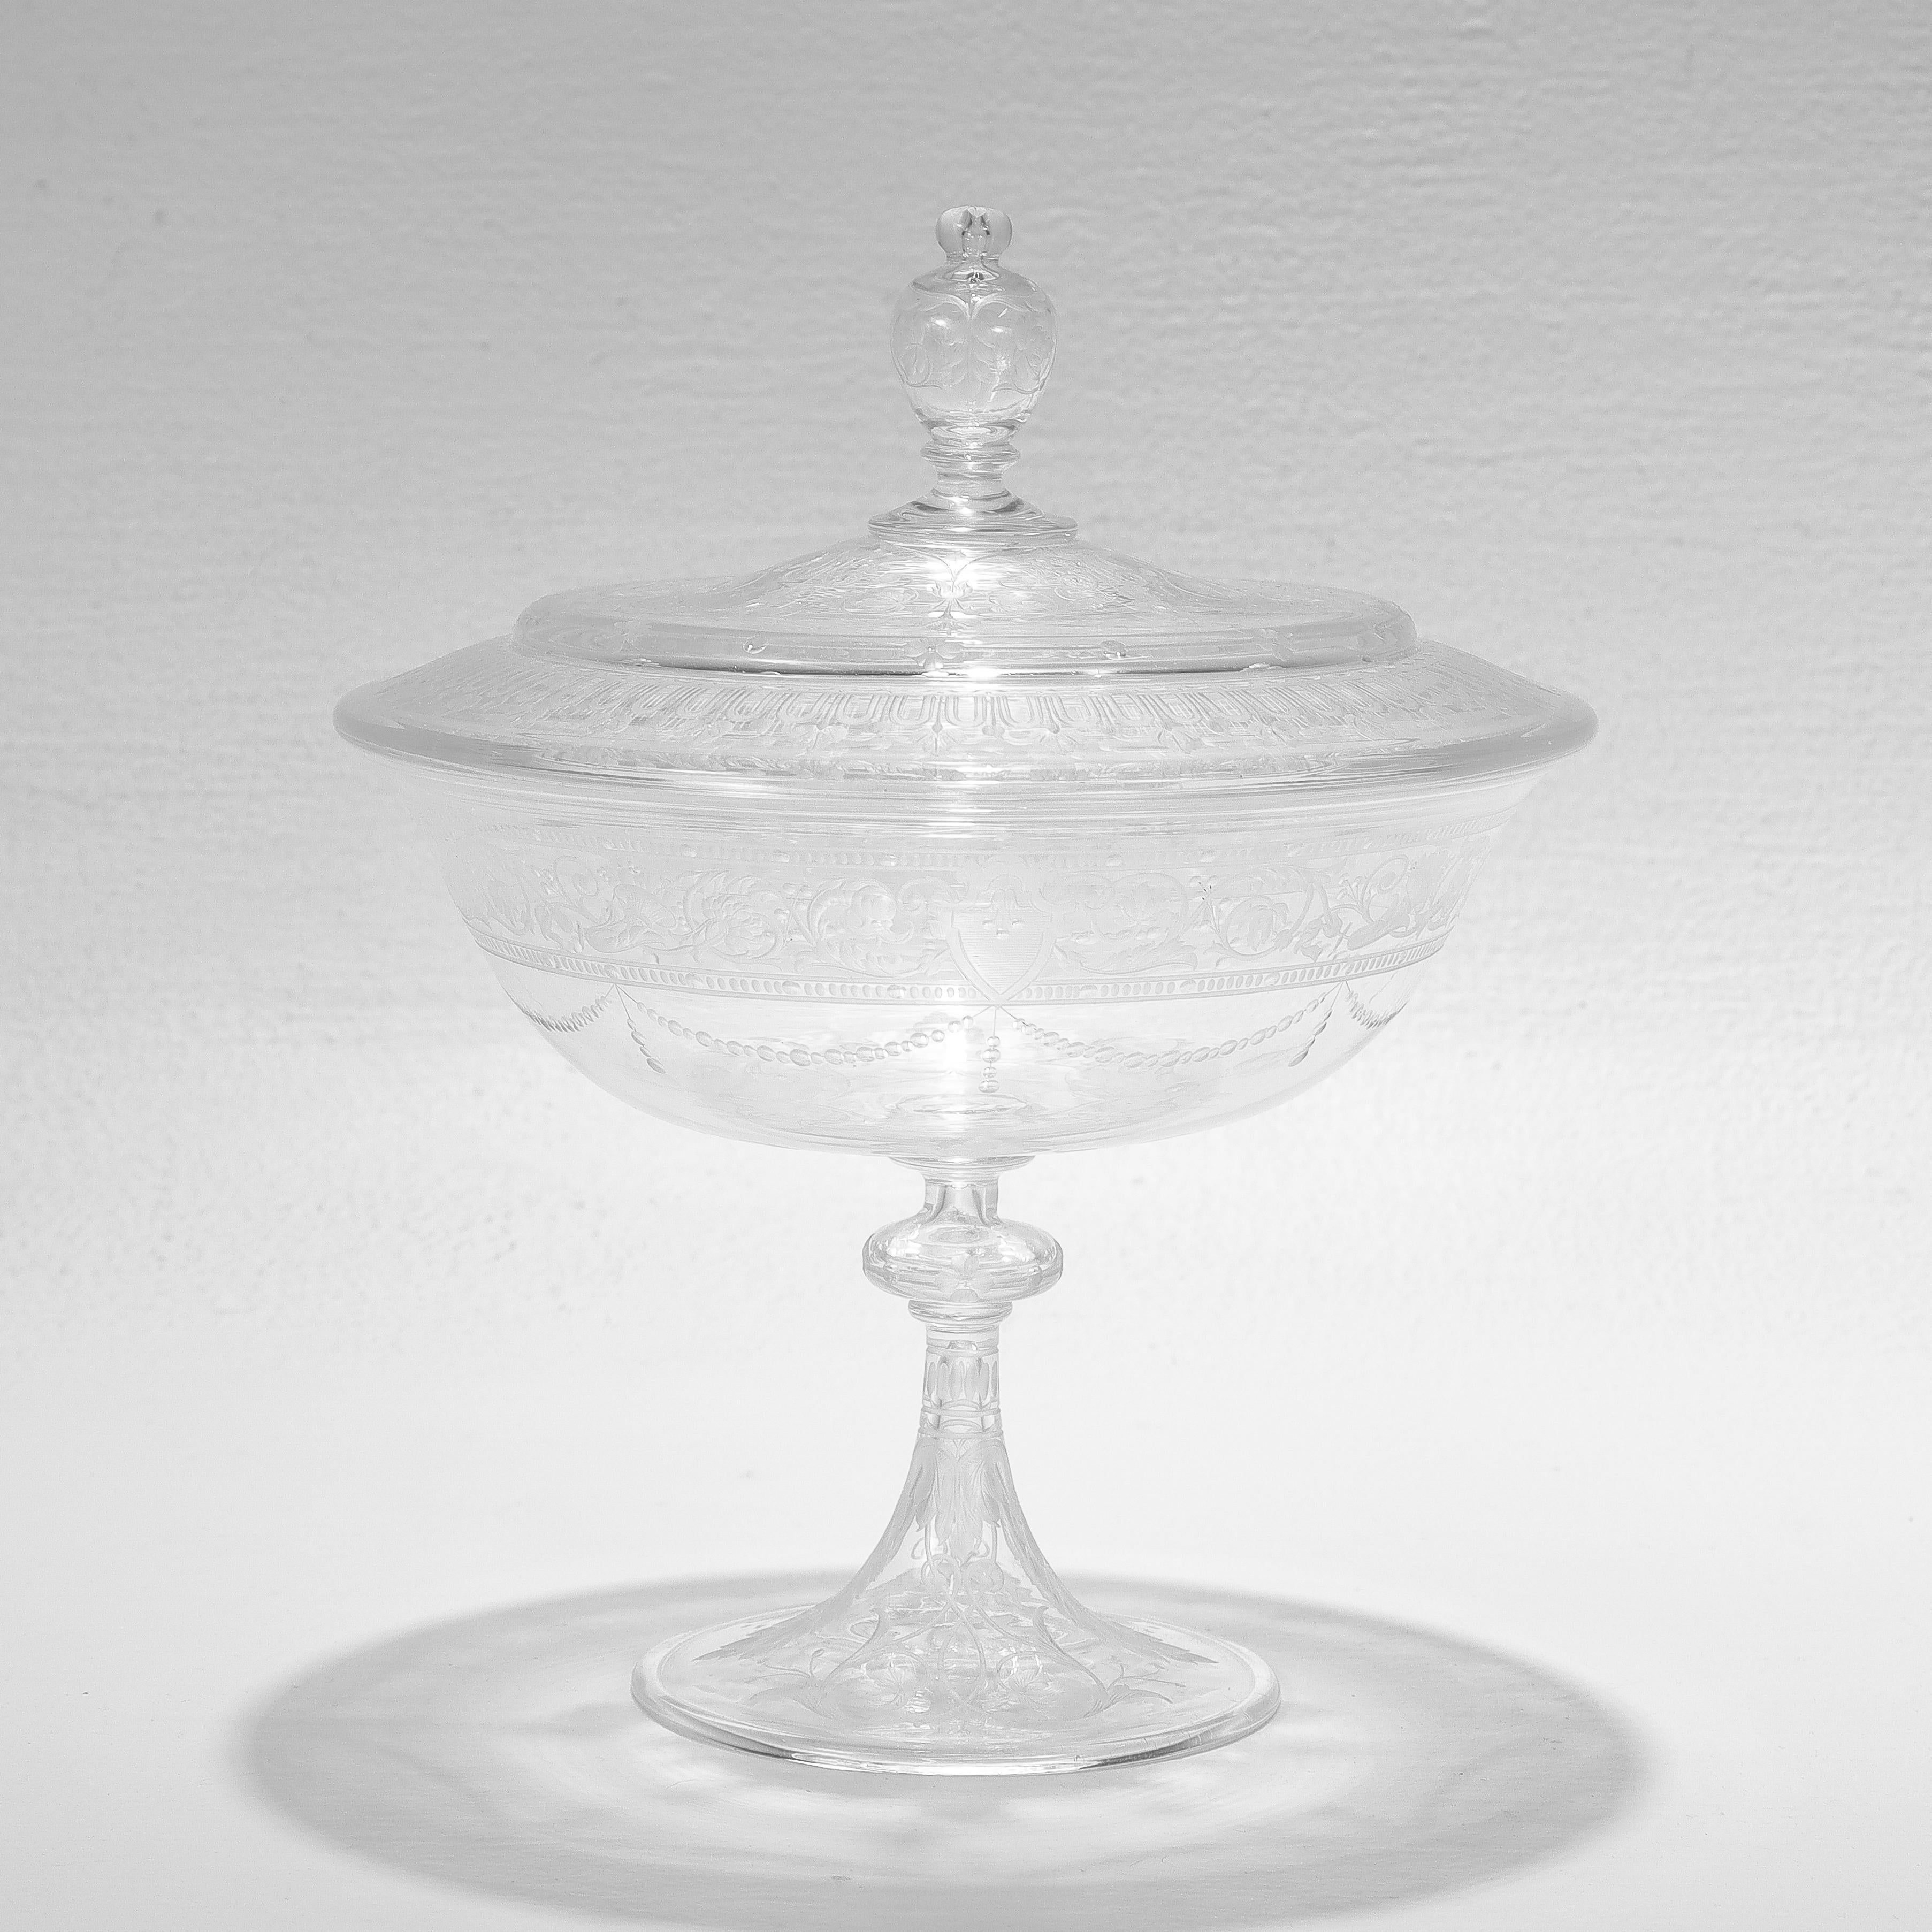 A fine antique etched and engraved glass tazza or compote.

Attributed to Stevens & Williams or Webb.

With engraved & etched flowers, leaves, and geometric designs,

The lid is topped with a decorative finial handle.

Simply a wonderful